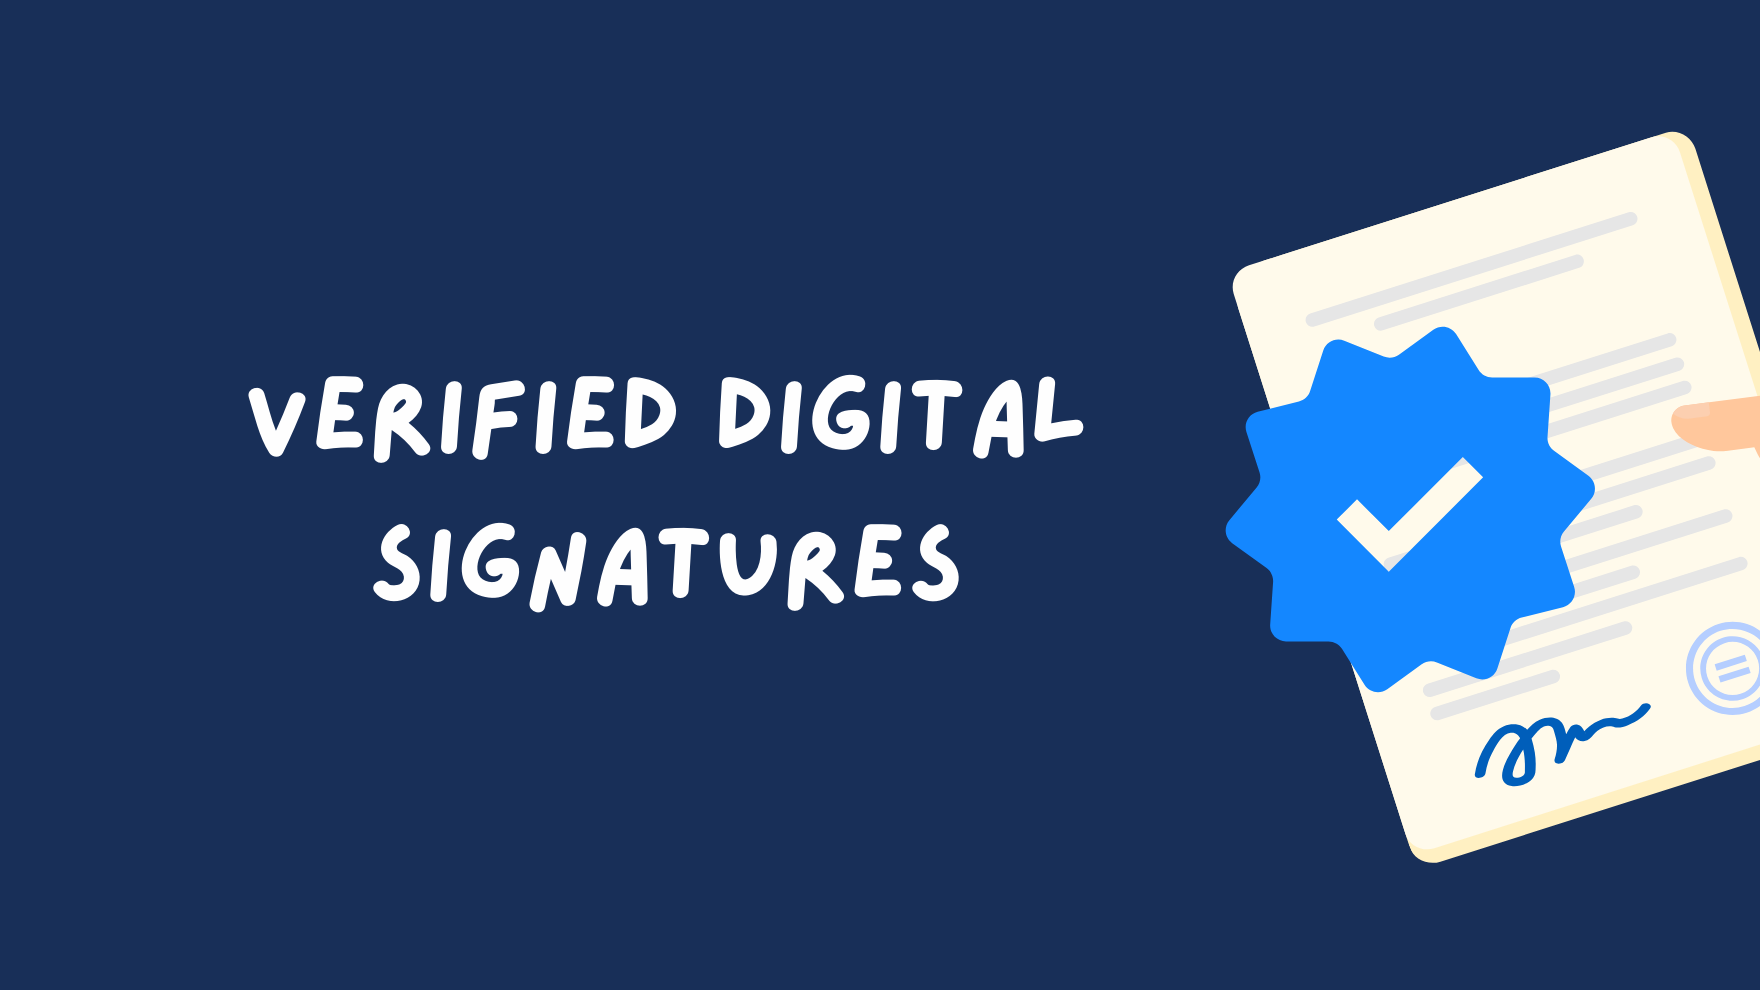 What is a Digital Signature?